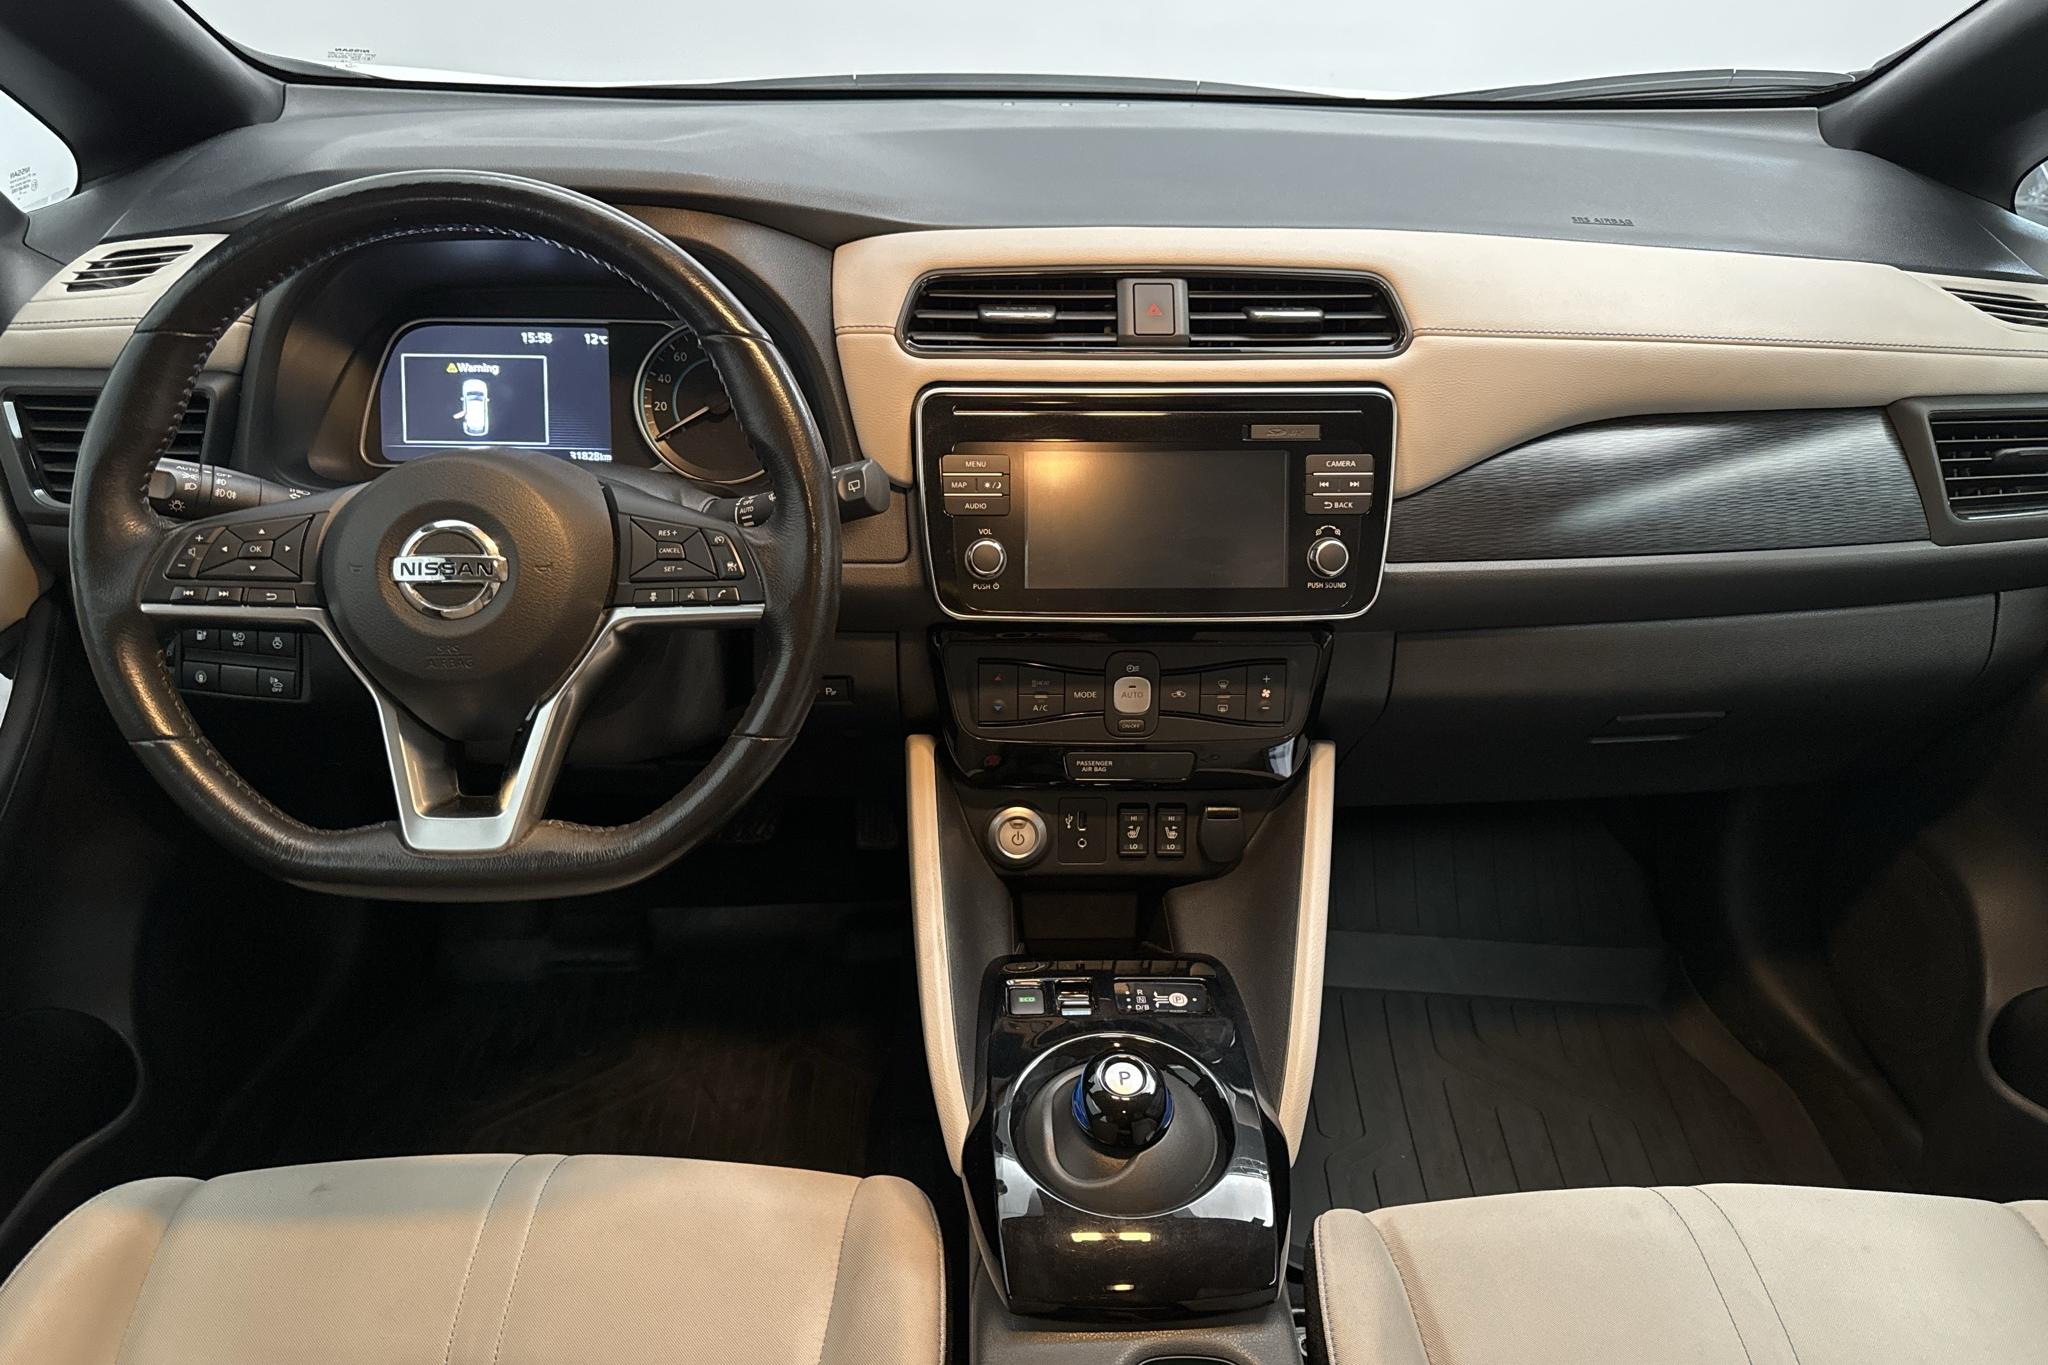 Nissan LEAF 5dr 39 kWh (150hk) - 31 820 km - Automatic - white - 2019